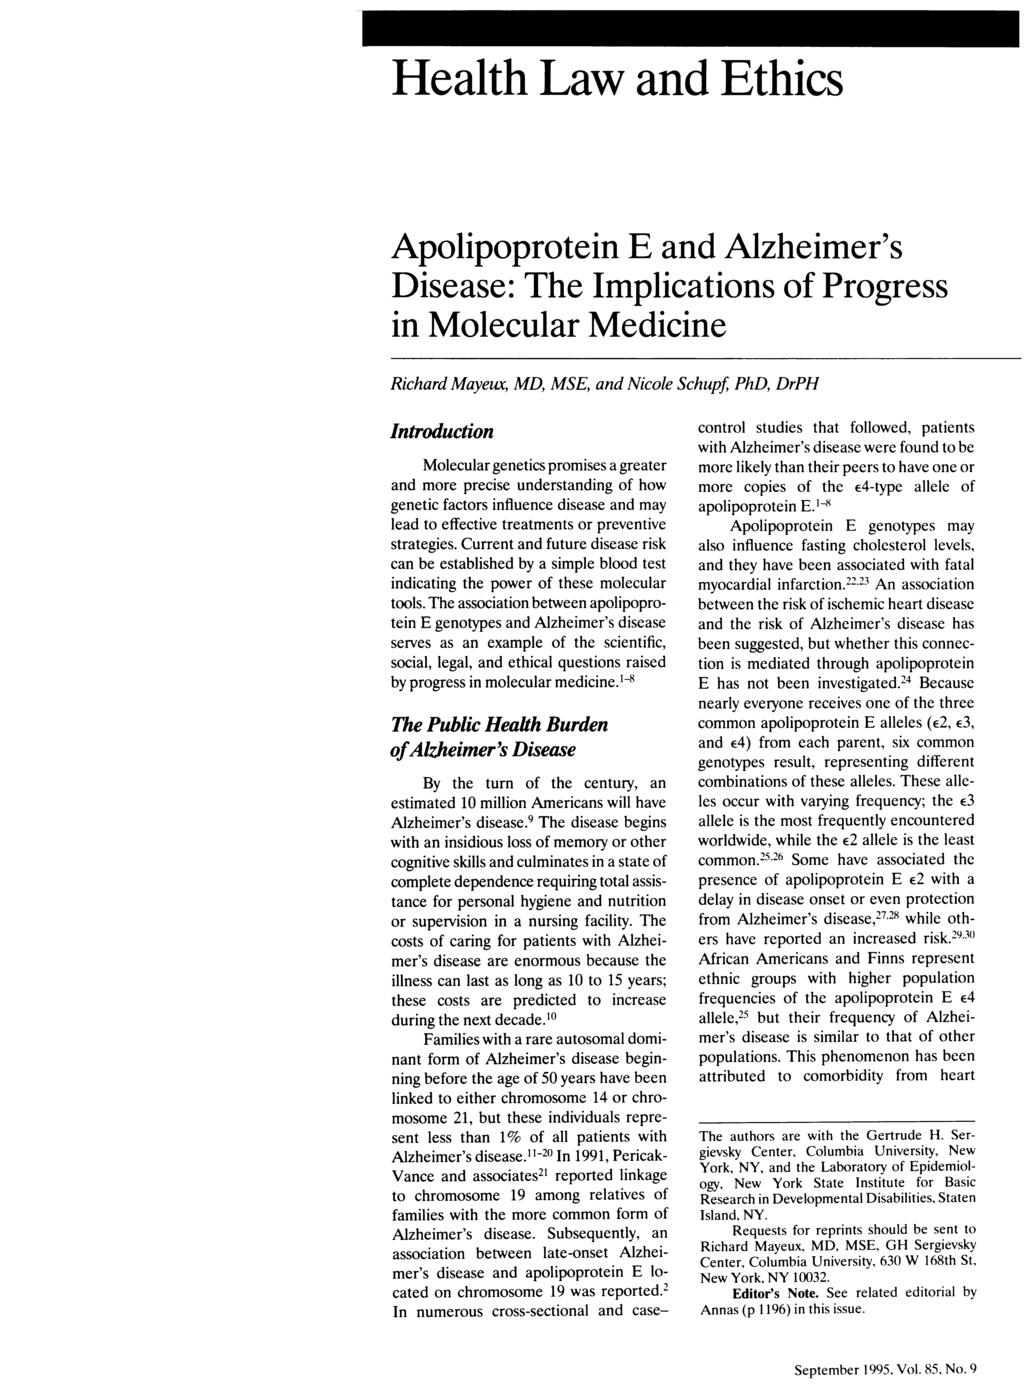 Apolipoprotein E and Alzheimer's Disease: The Implications of Progress in Molecular Medicine Richard Mayeux, MD, MSE, and Nicole Schupf, PhD, DrPH Introduction Molecular genetics promises a greater